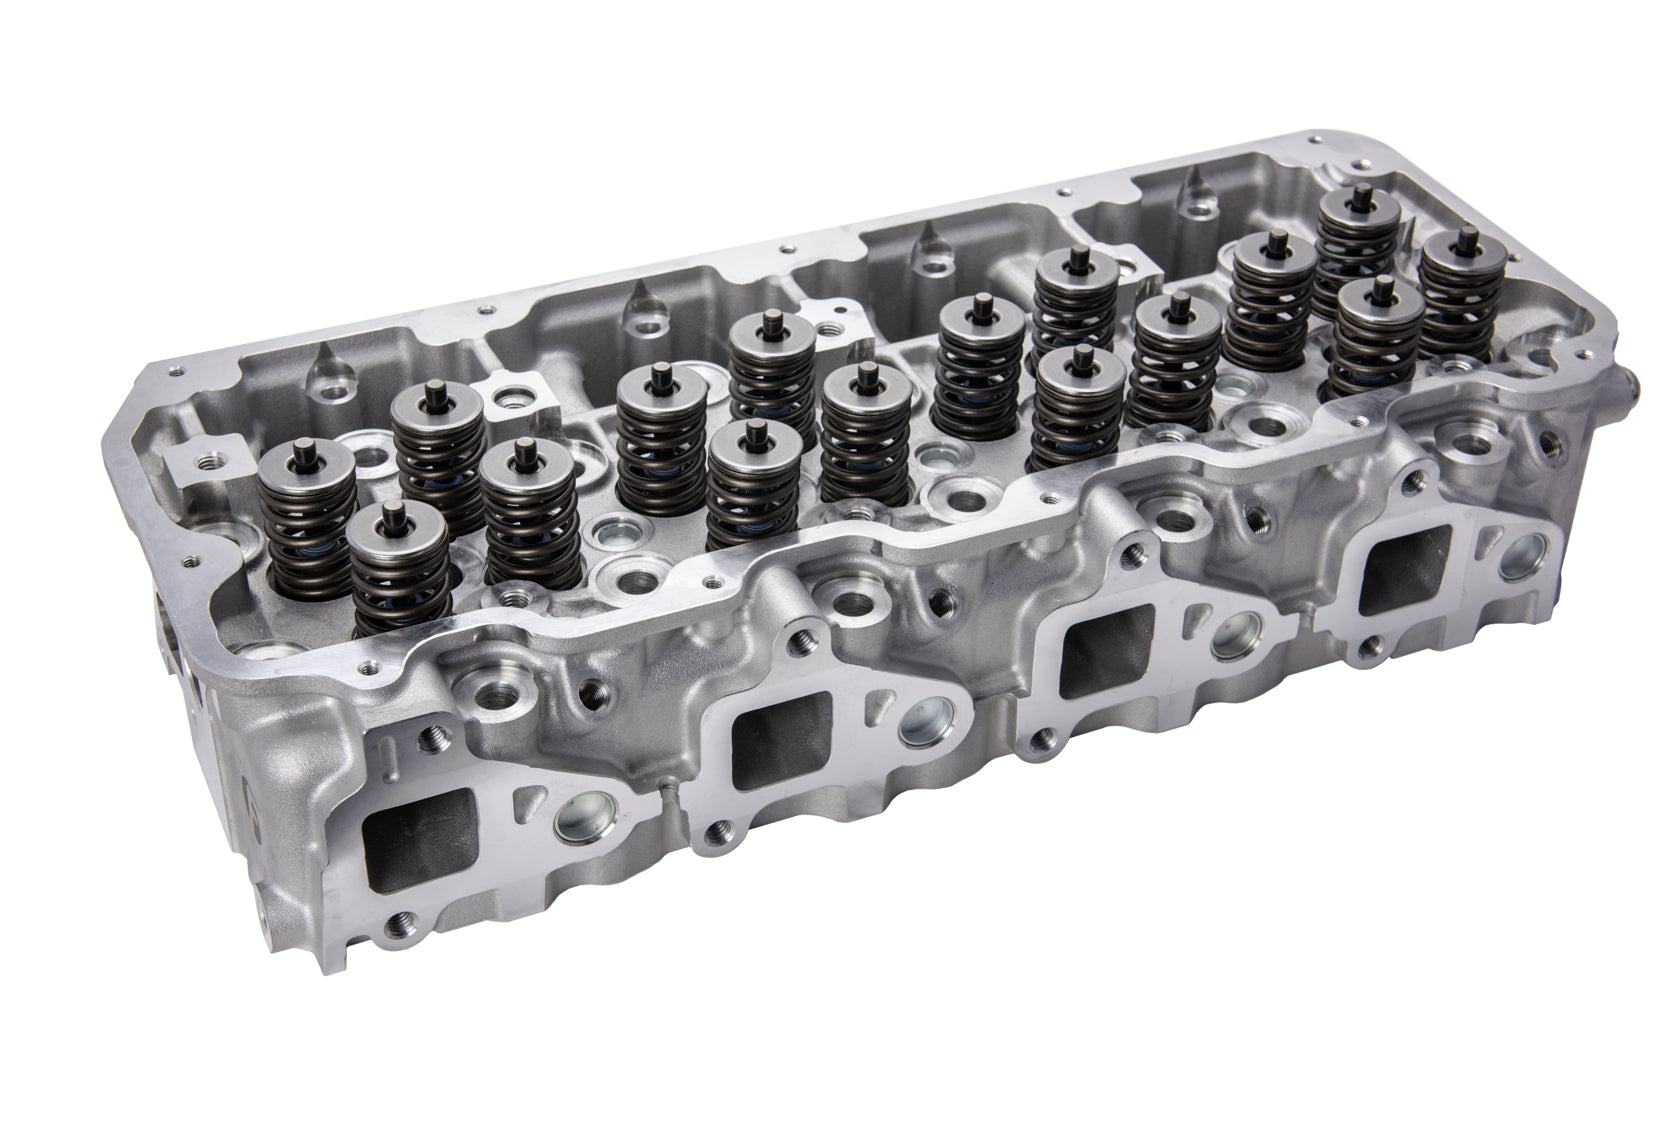 Fleece Performance Freedom Series Duramax Cylinder Head with Cupless Injector Bore for 2001-2004 LB7 (Driver Side) FPE-61-10001-D-CL